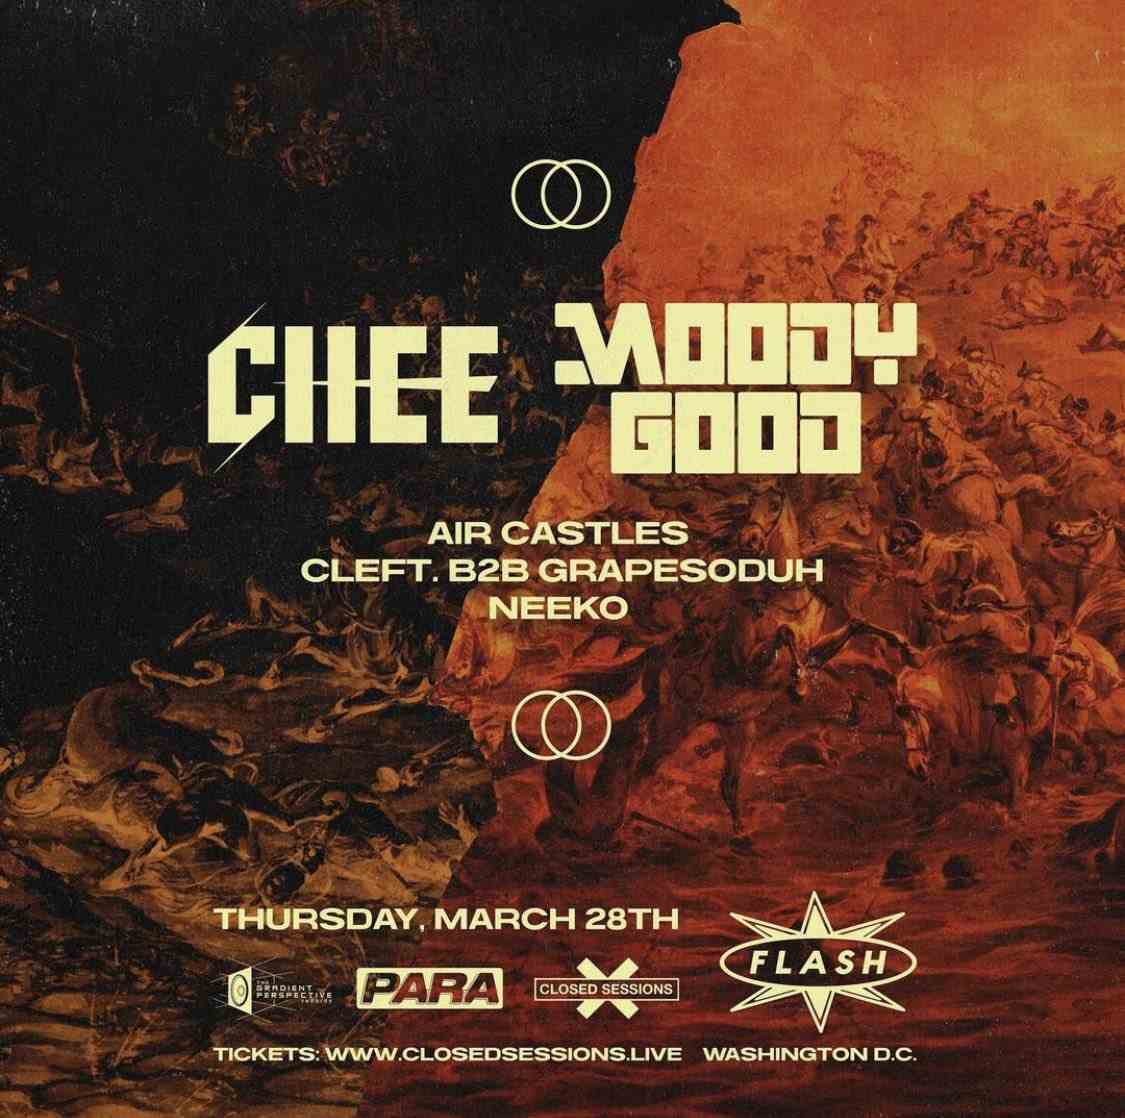 PARA PRESENTS, THE GRADIENT PERSPECTIVE & CLOSED SESSIONS PRESENTS: Chee - Moody Good event flyer